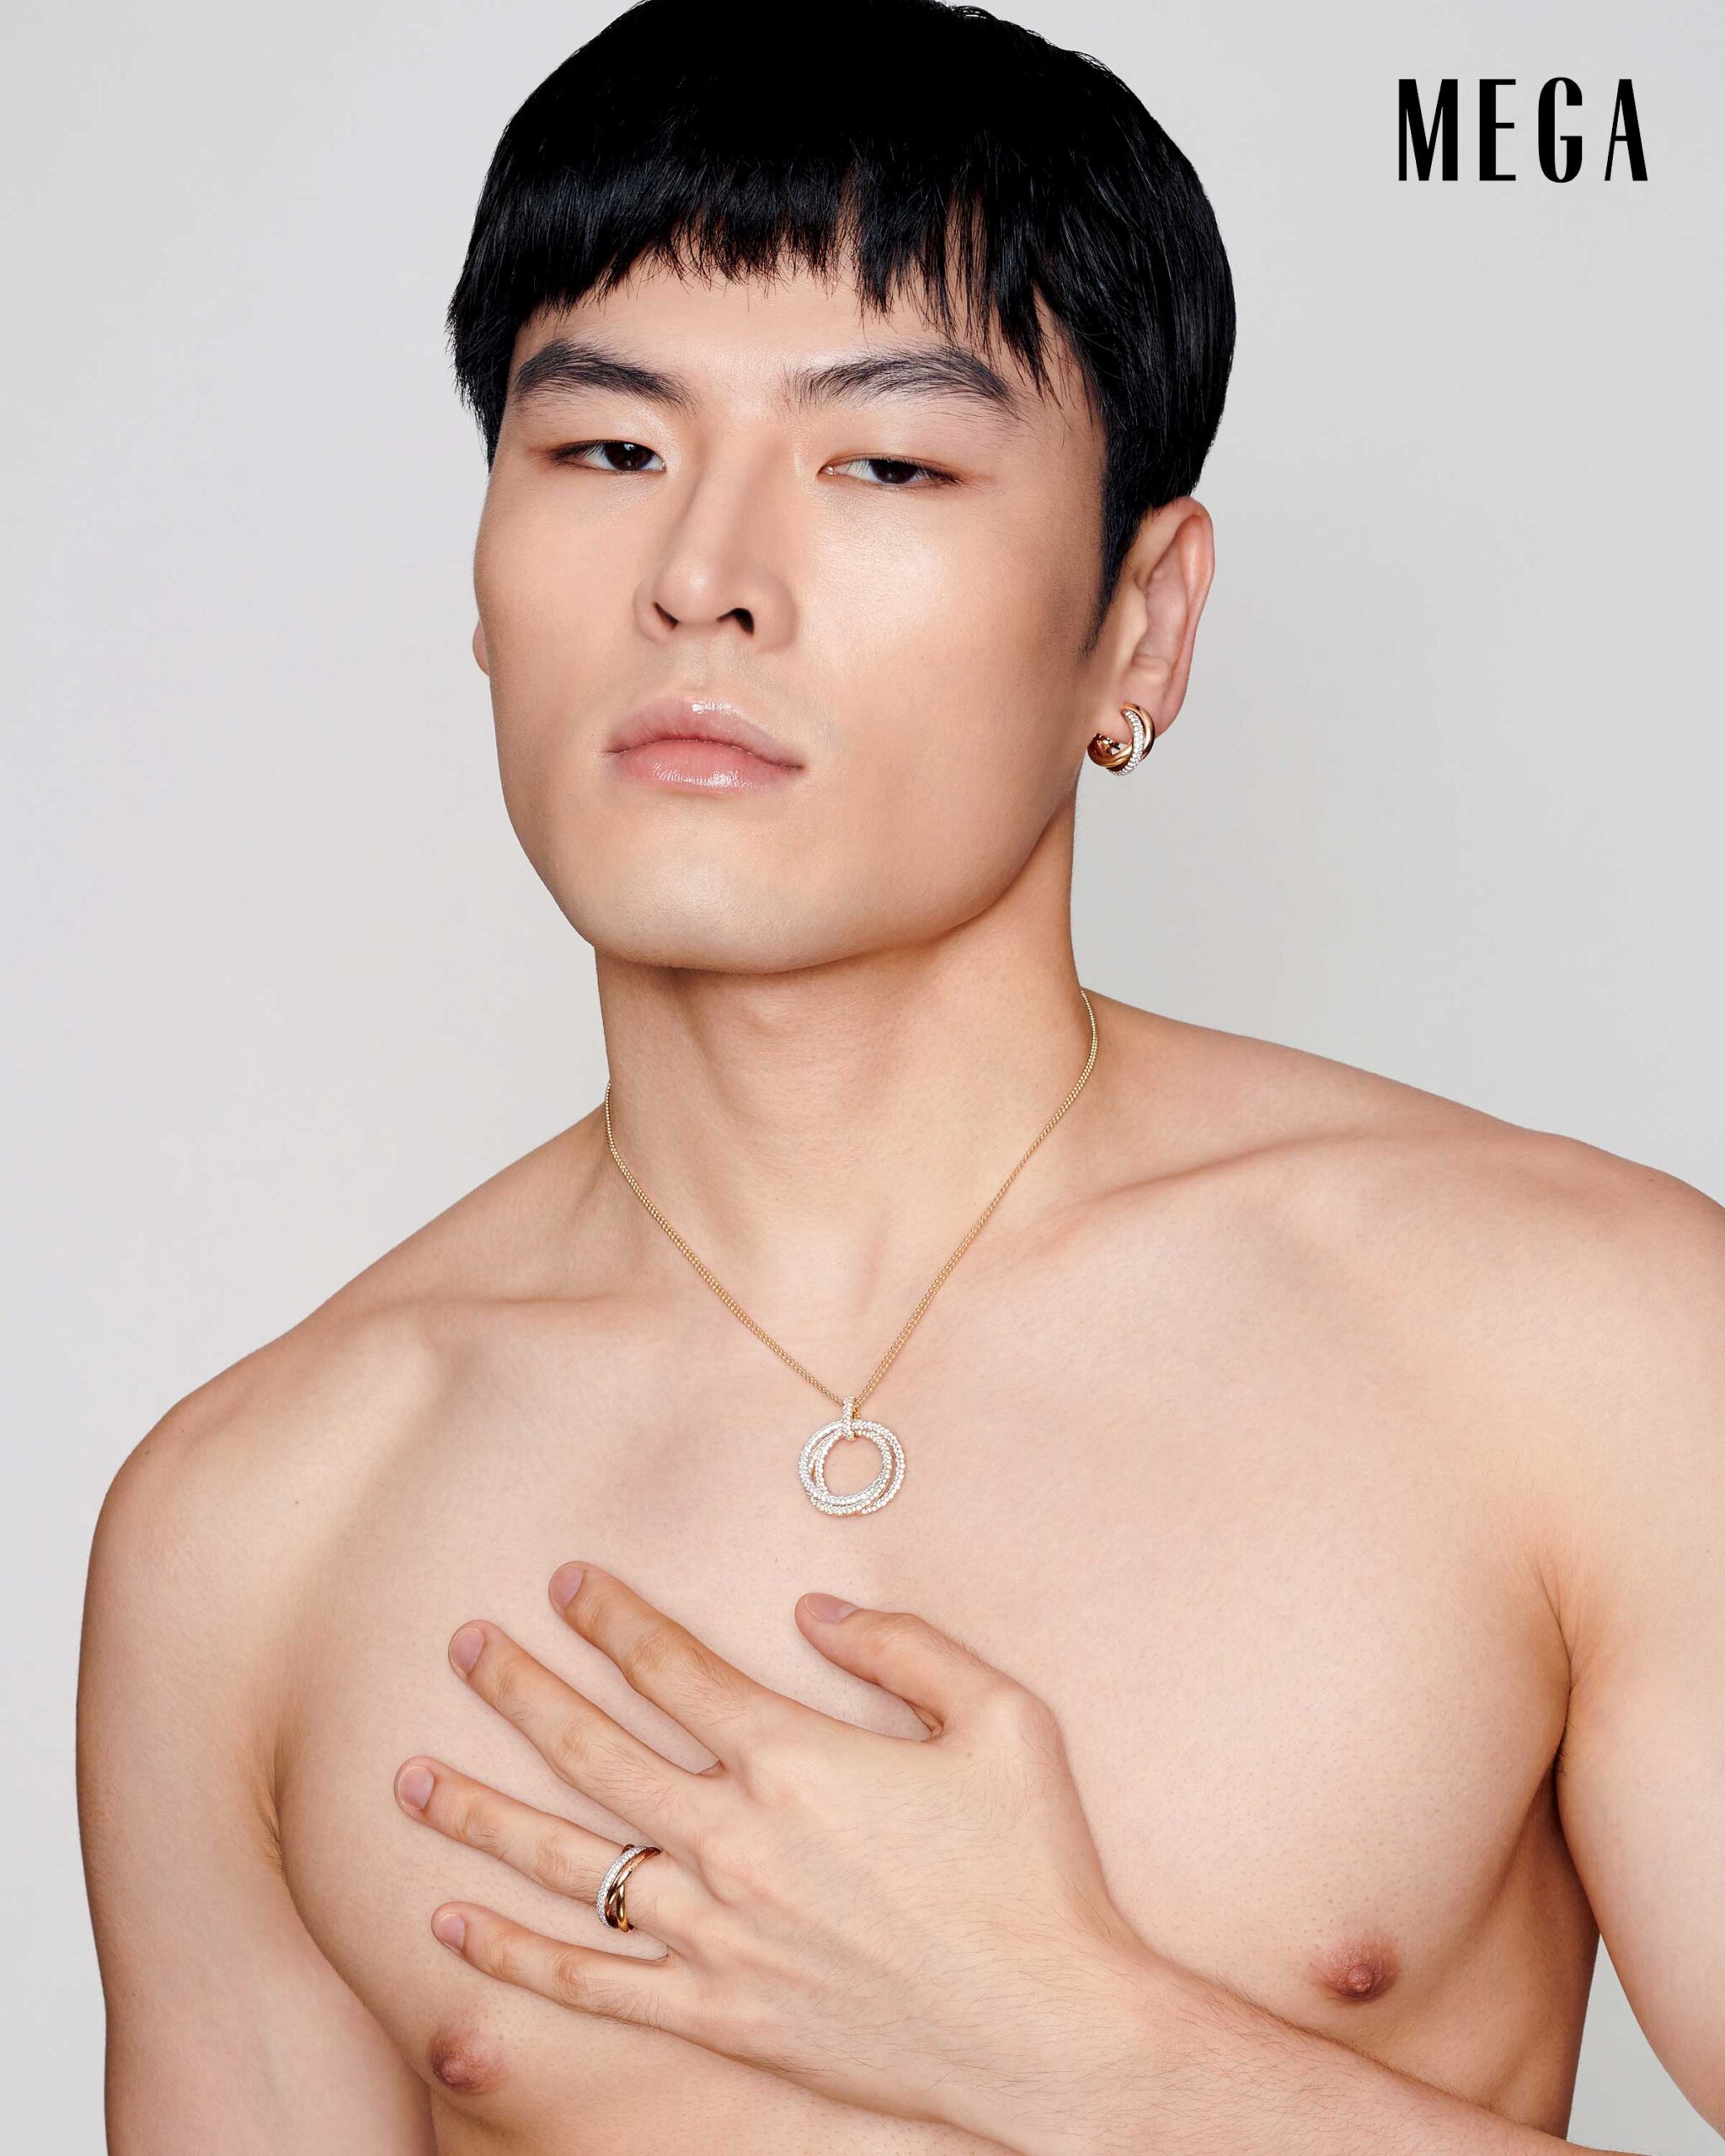 Craig Uy is wearing a CARTIER earring, neckalce, and ring